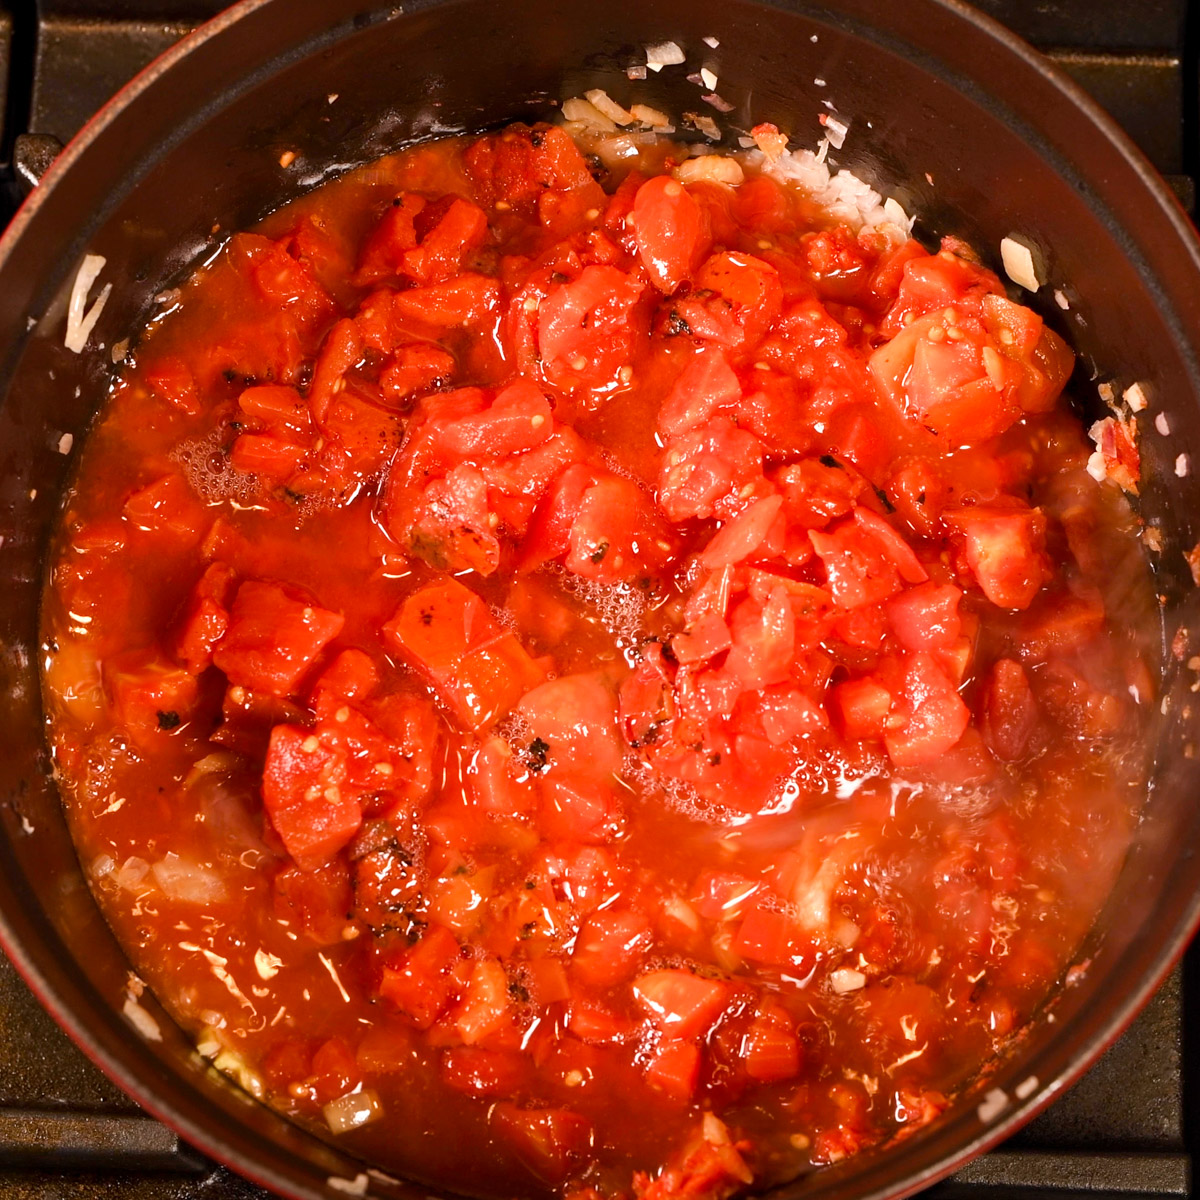 Add canned tomatoes and juice to the shallots and fennel.